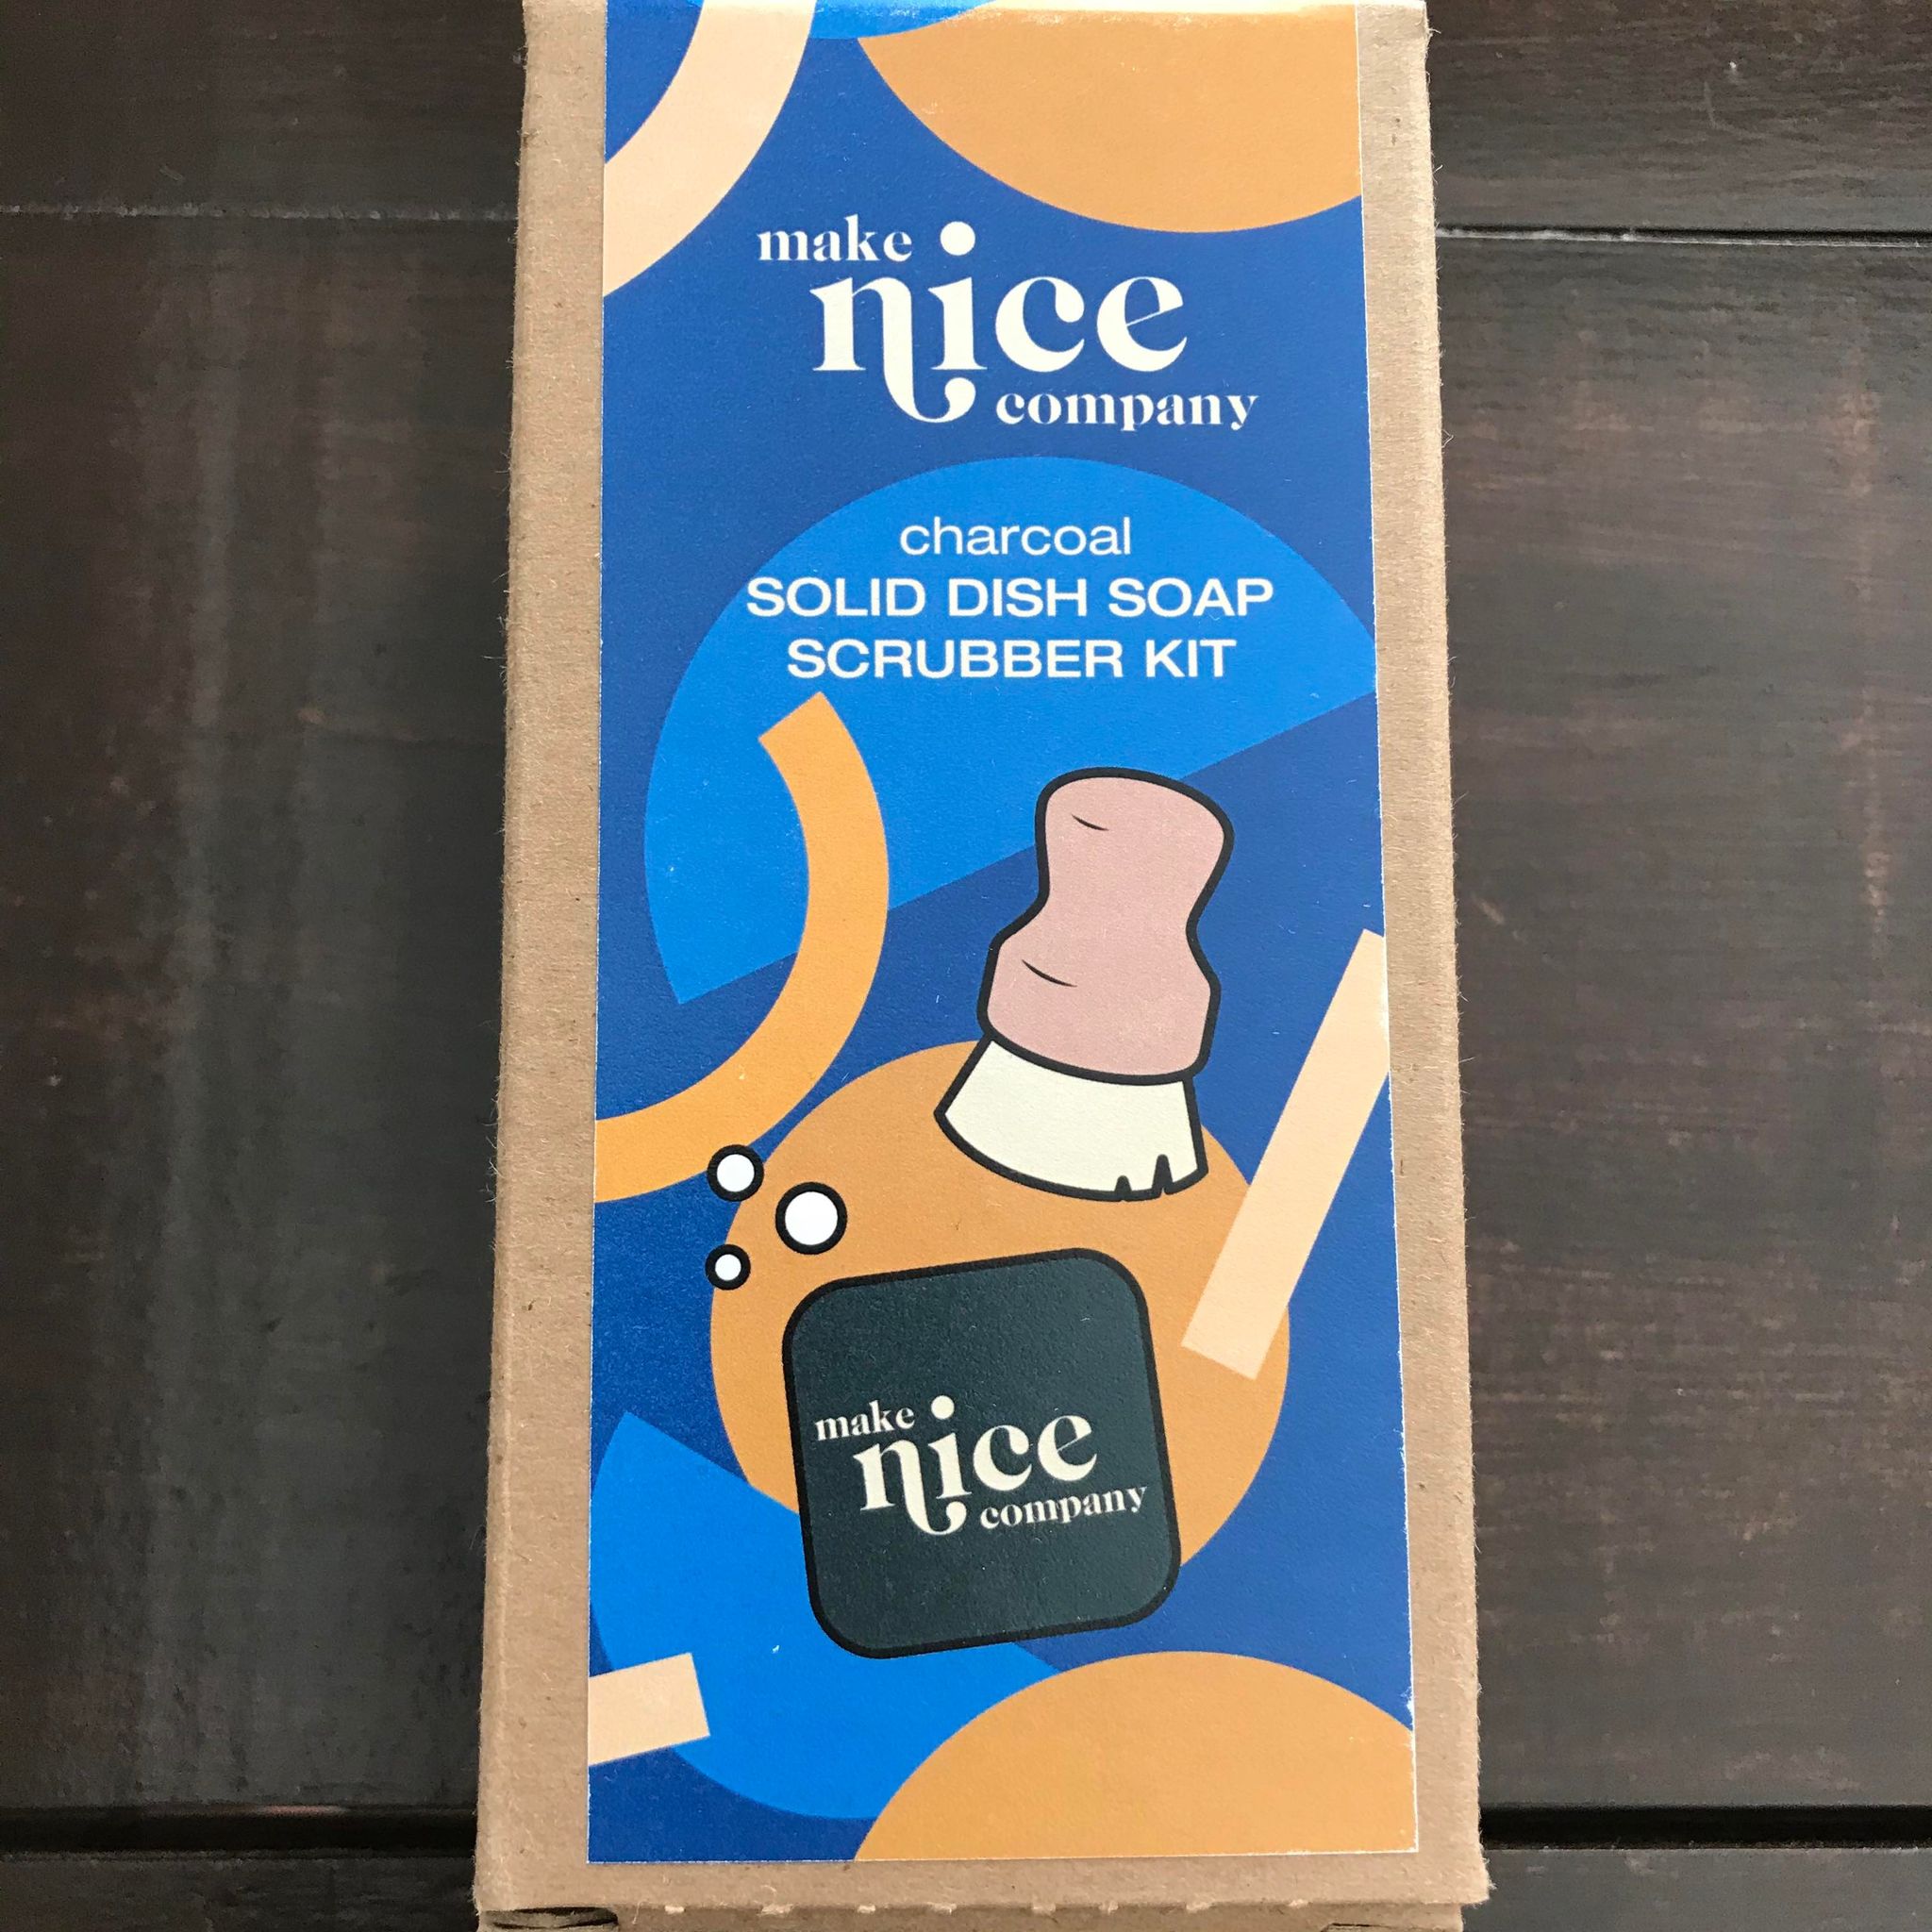 Charcoal solid dish soap block and wood pot scrubber brush set made in Canada by the Make Nice Company and packaged in a brown cardboard box